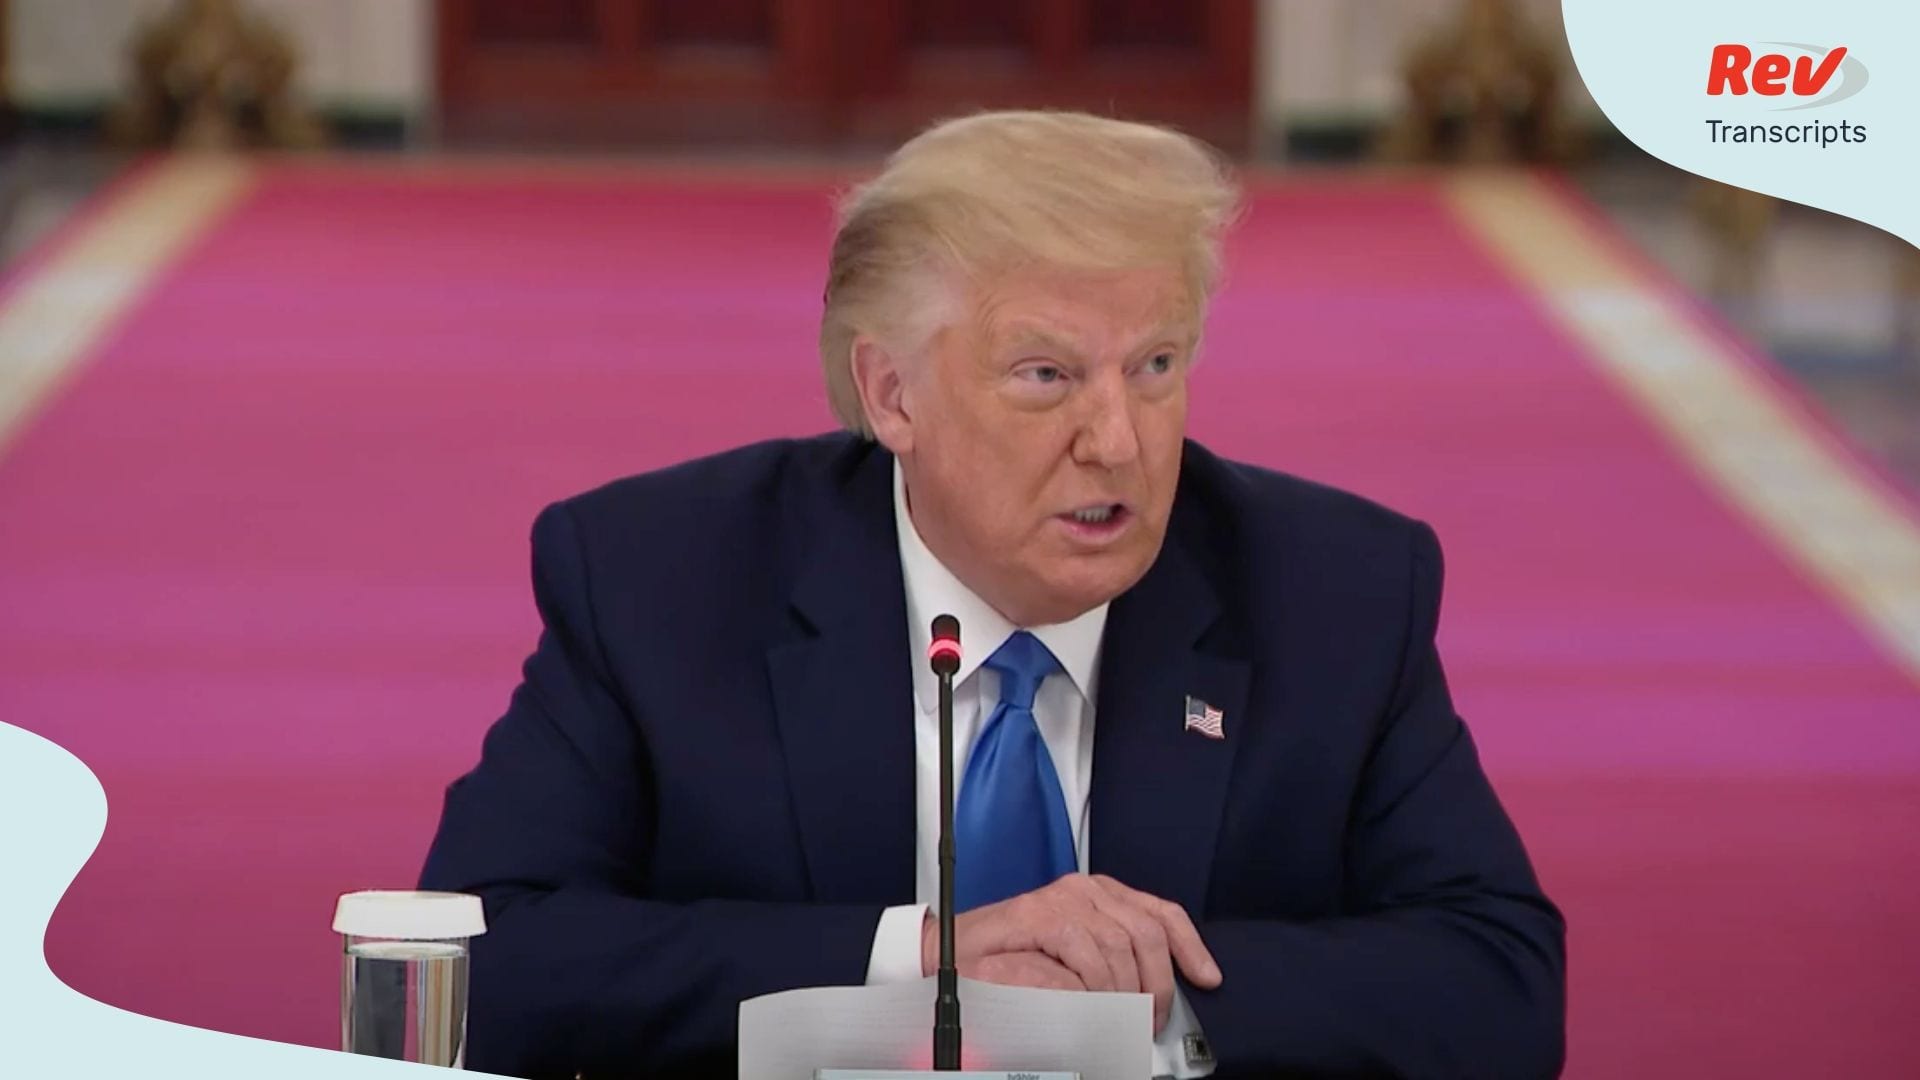 Trump Roundtable On Positive Impact Of Law Enforcement